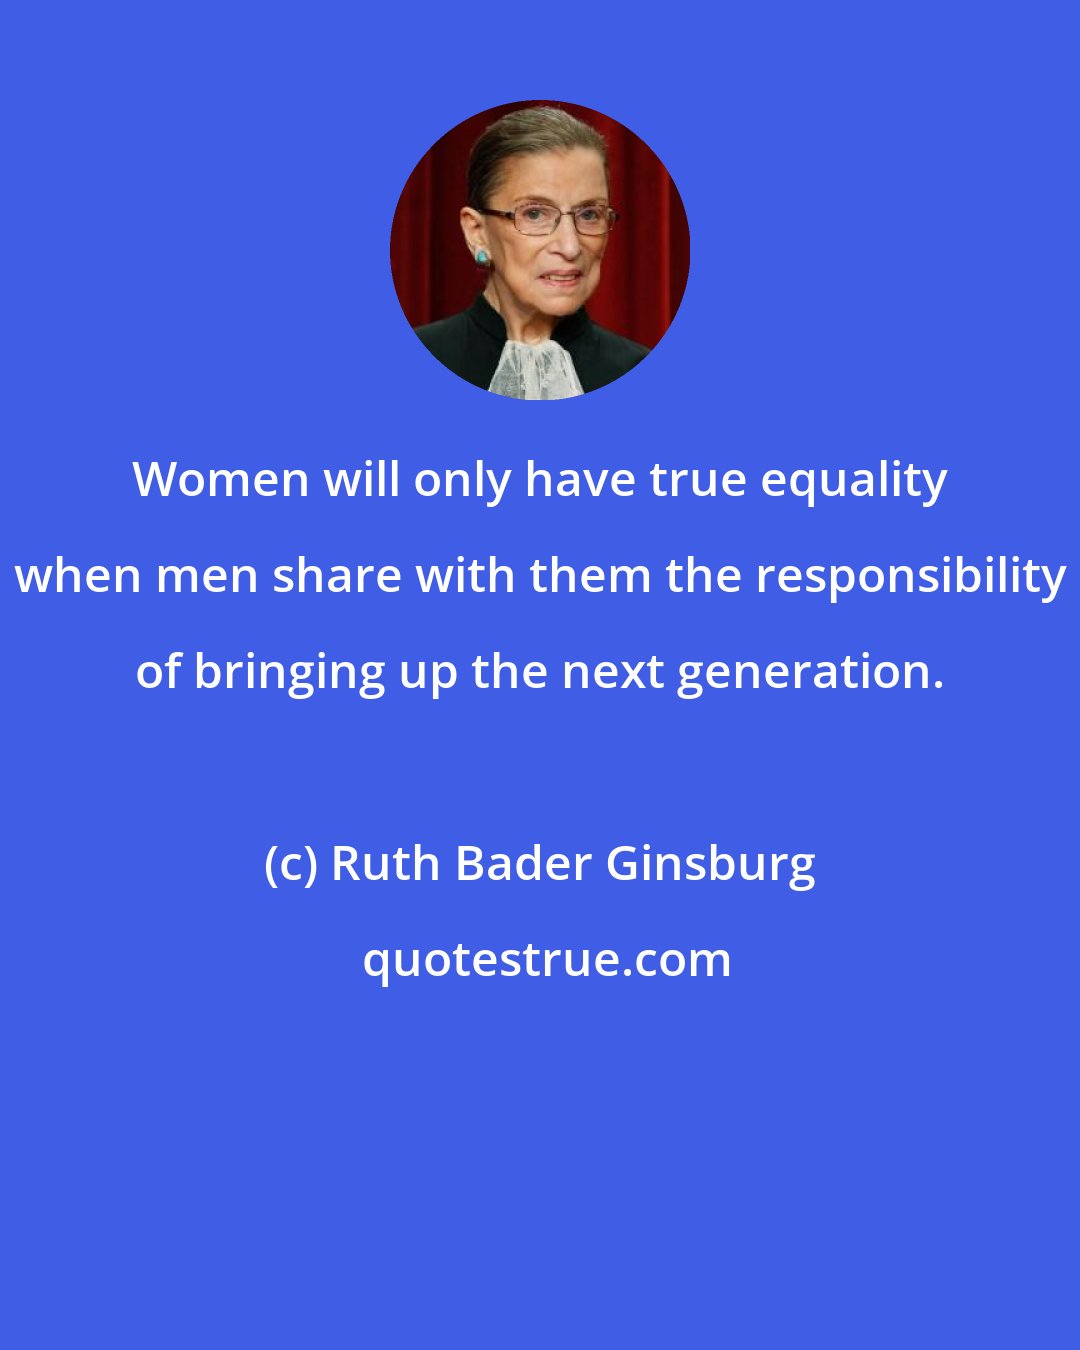 Ruth Bader Ginsburg: Women will only have true equality when men share with them the responsibility of bringing up the next generation.